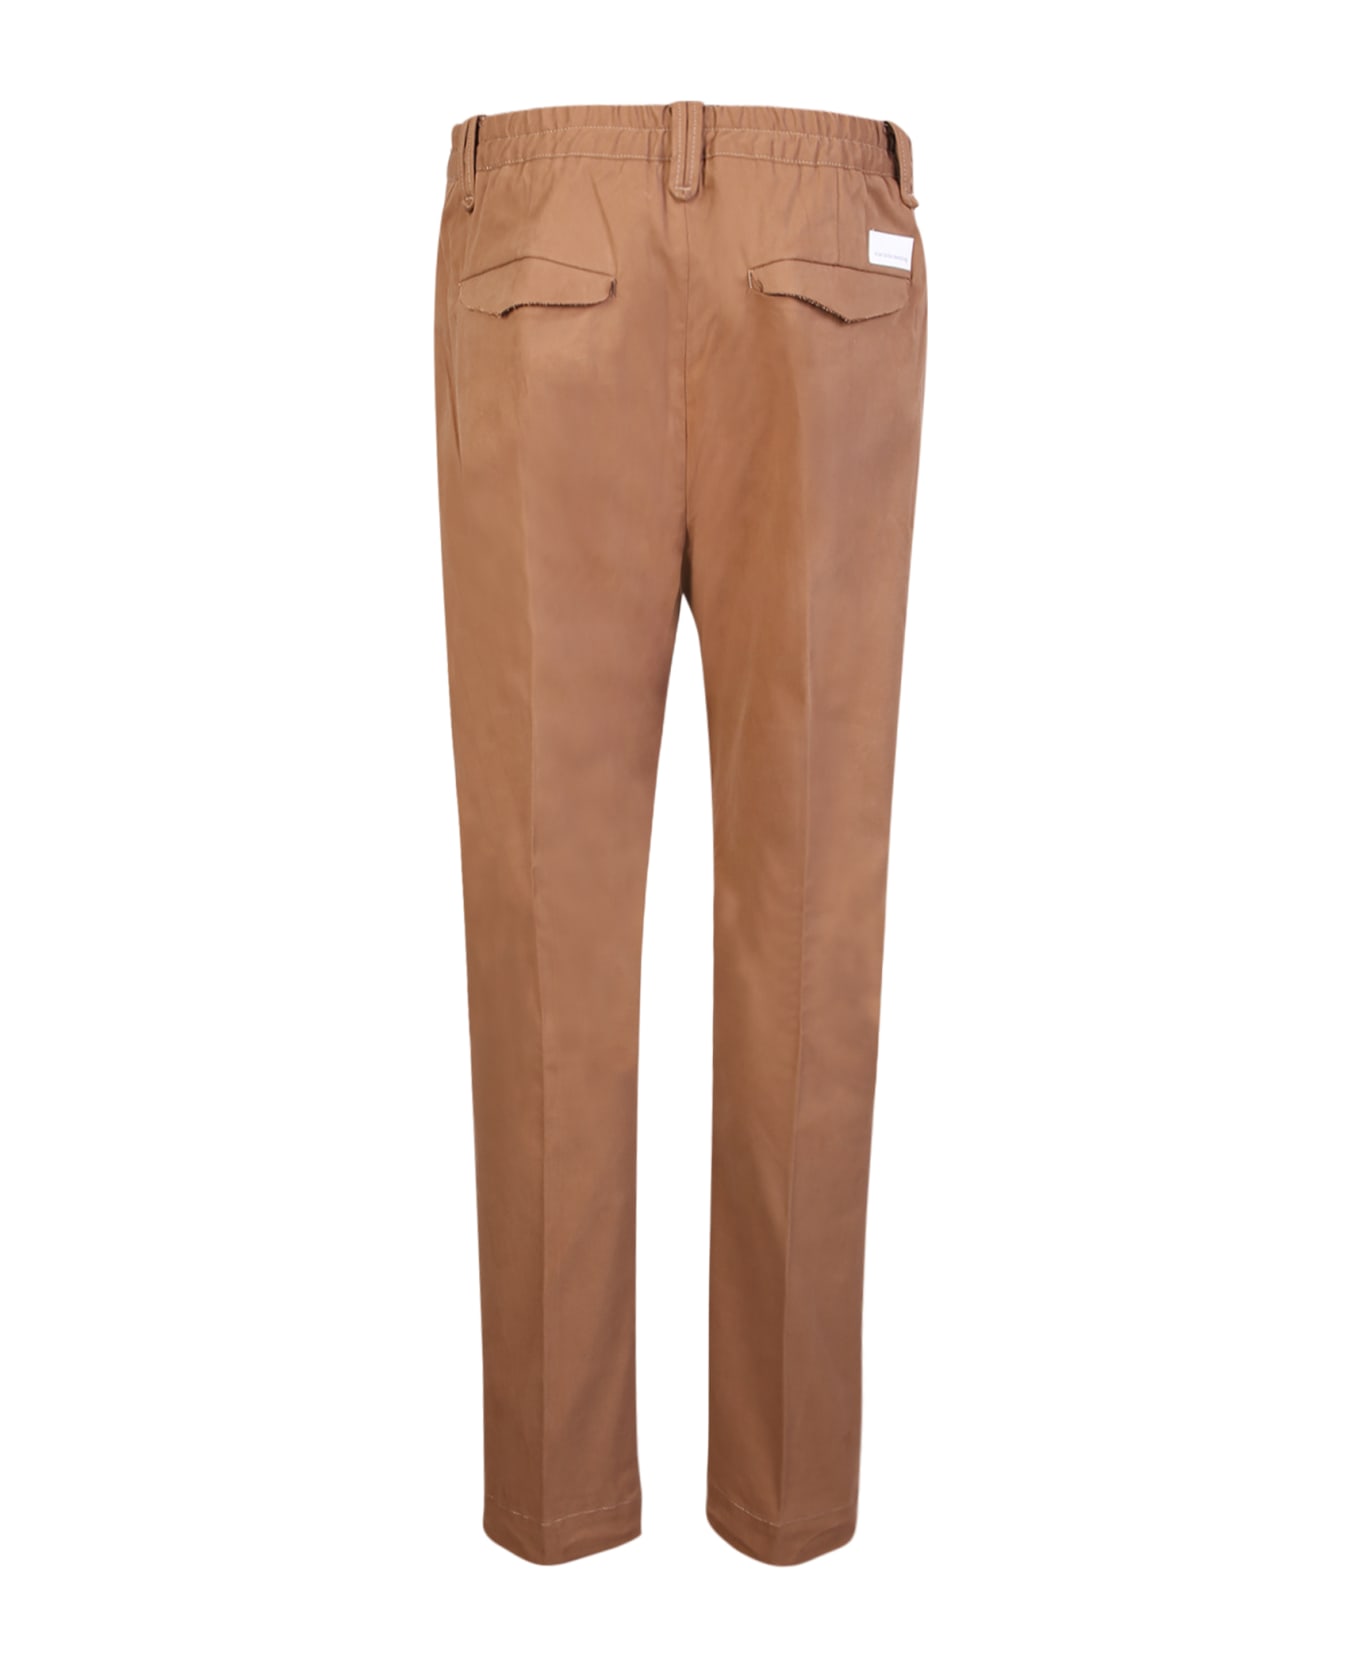 Nine in the Morning Bisquit Yoga Trousers - Beige